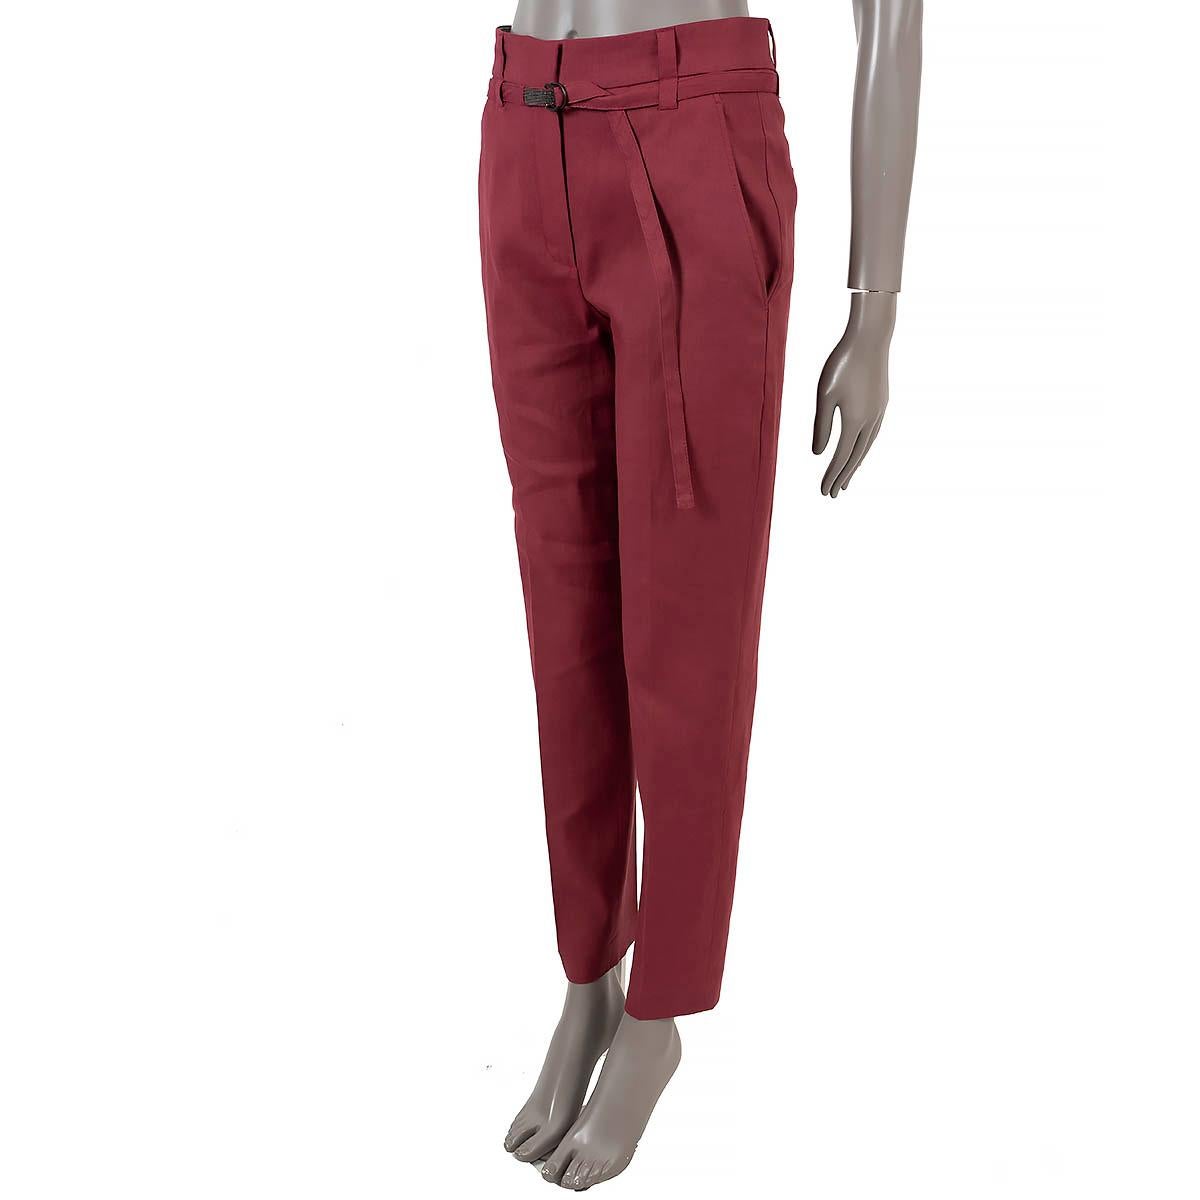 100% authentic Brunello Cucinelli pants in rust linen (65%), cotton (34%) and elastane (1%). Feature a high-waisted paperbag waist with tapered legs, pleats, two slant pockets and a matching fabric belt with Monili buckle. Has been worn and is in